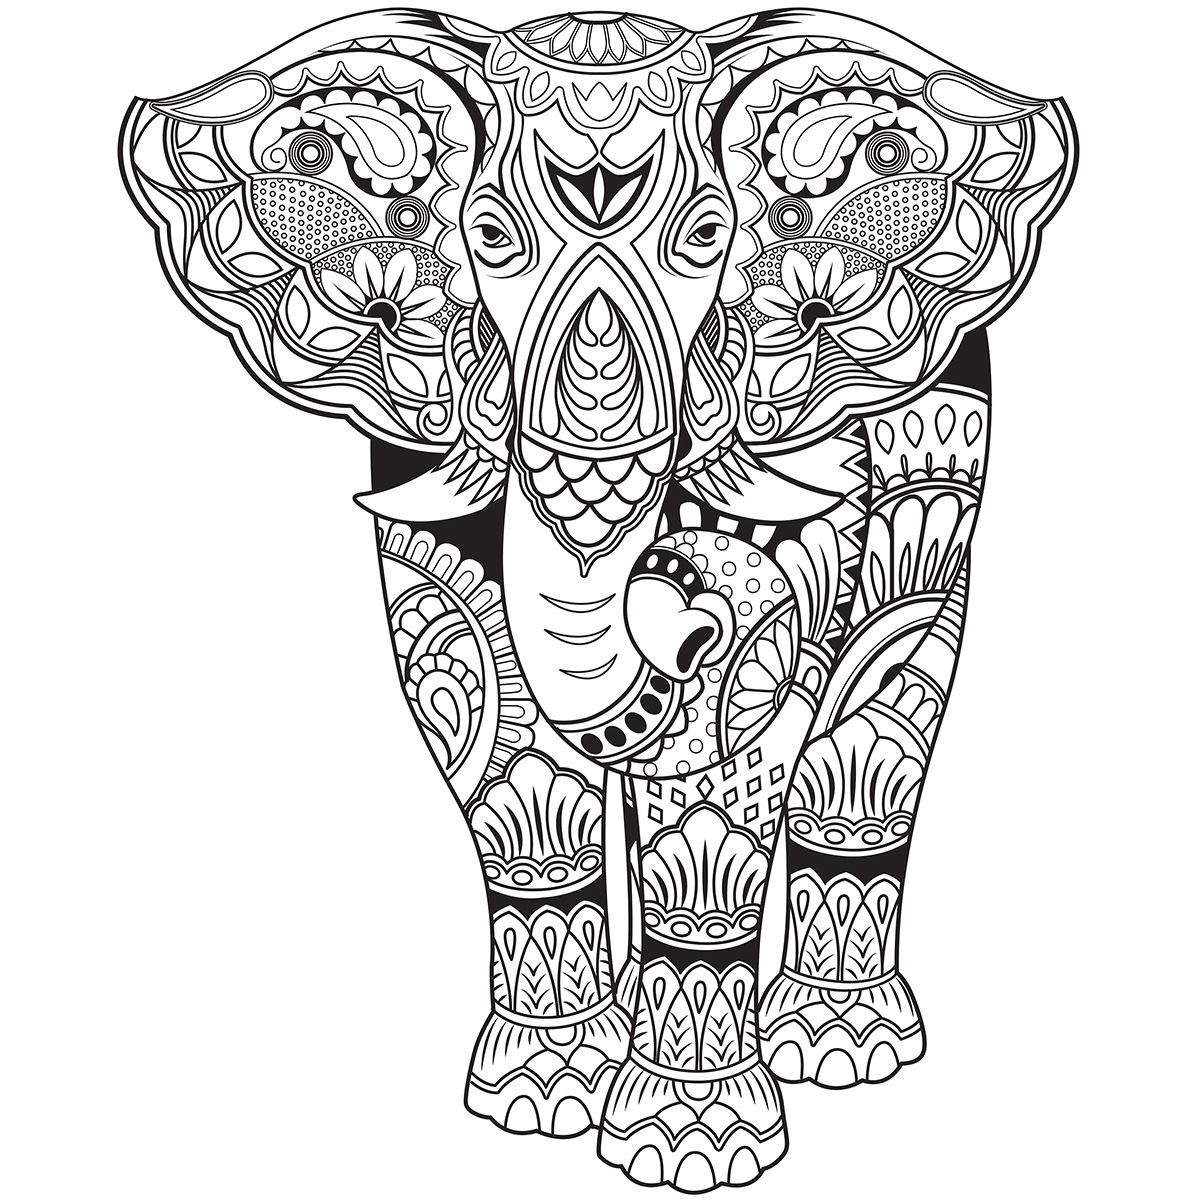 761 Cartoon Zentangle Elephant Coloring Page for Adult